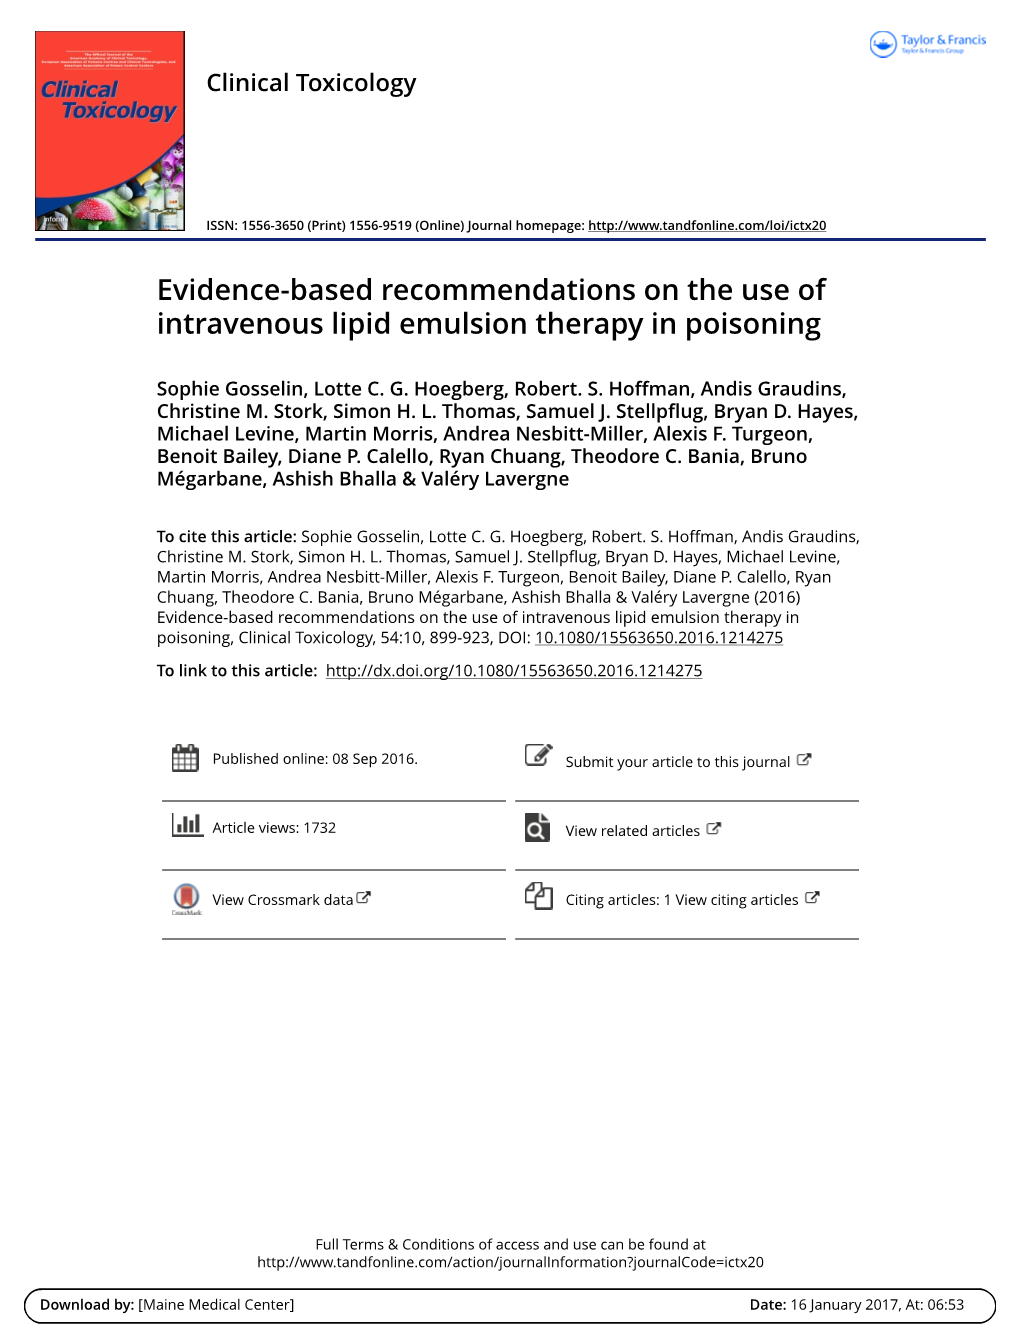 Evidence-Based Recommendations on the Use of Intravenous Lipid Emulsion Therapy in Poisoning